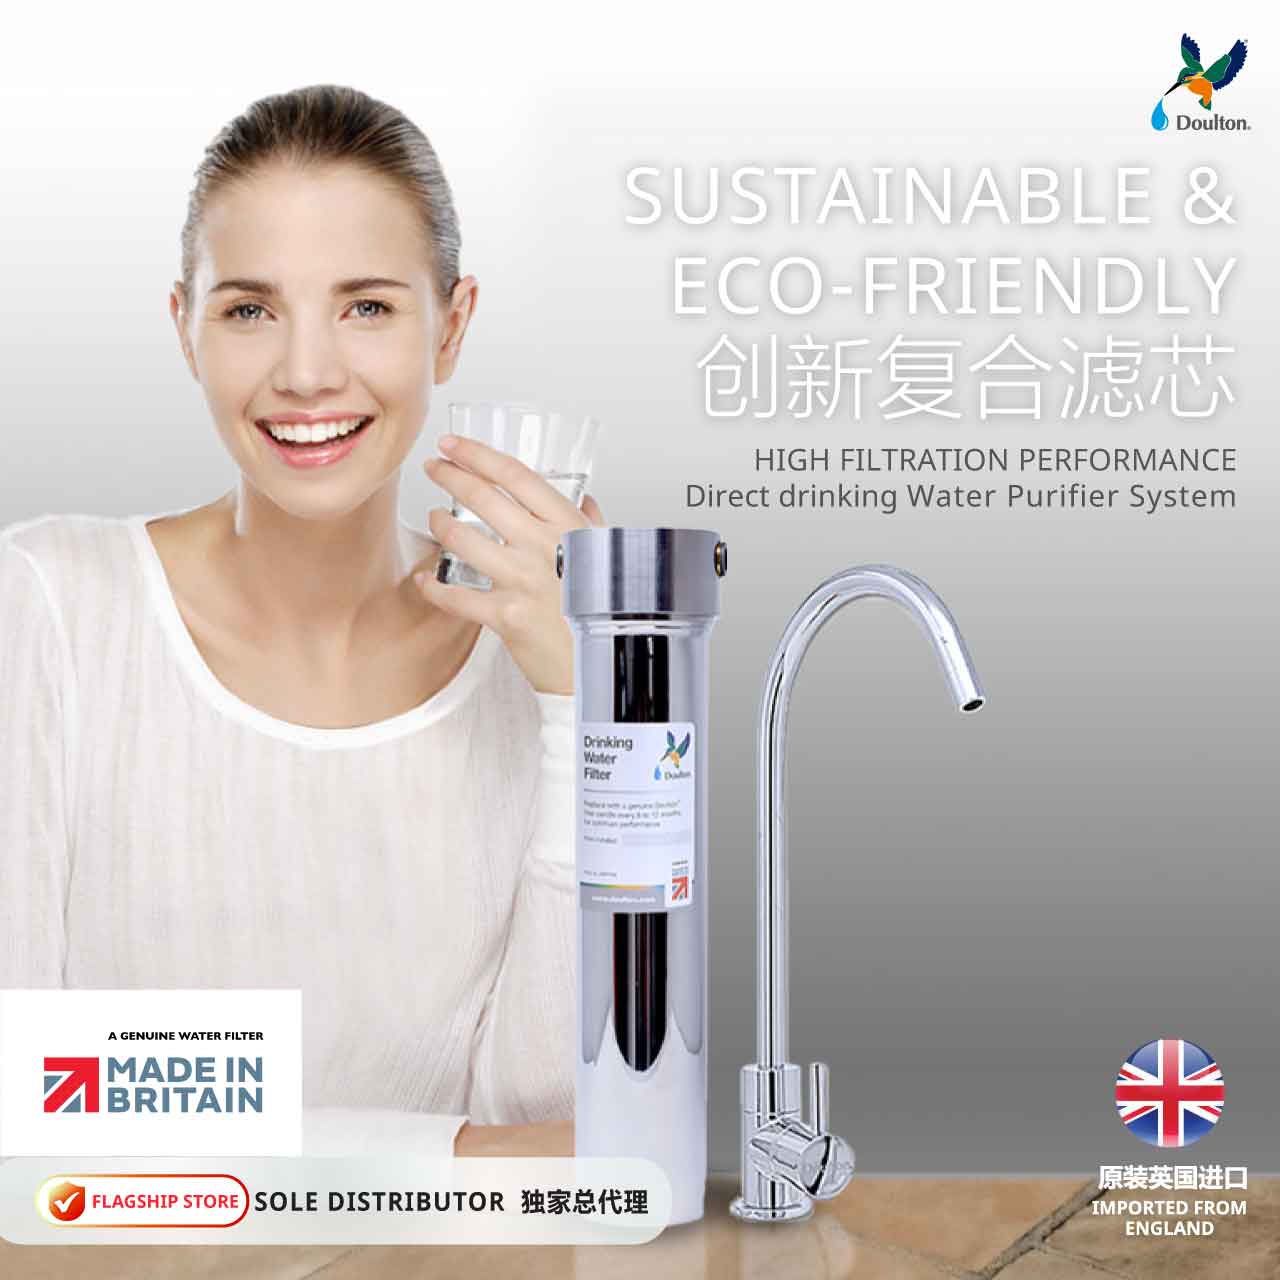 Experience the Purity Revolution: Doulton HIS Ultracarb NSF Certified Inline Undersink Filtration - Pure Water, Simplified System, [ FREE Installation, Value, S$150 - limited time offer]